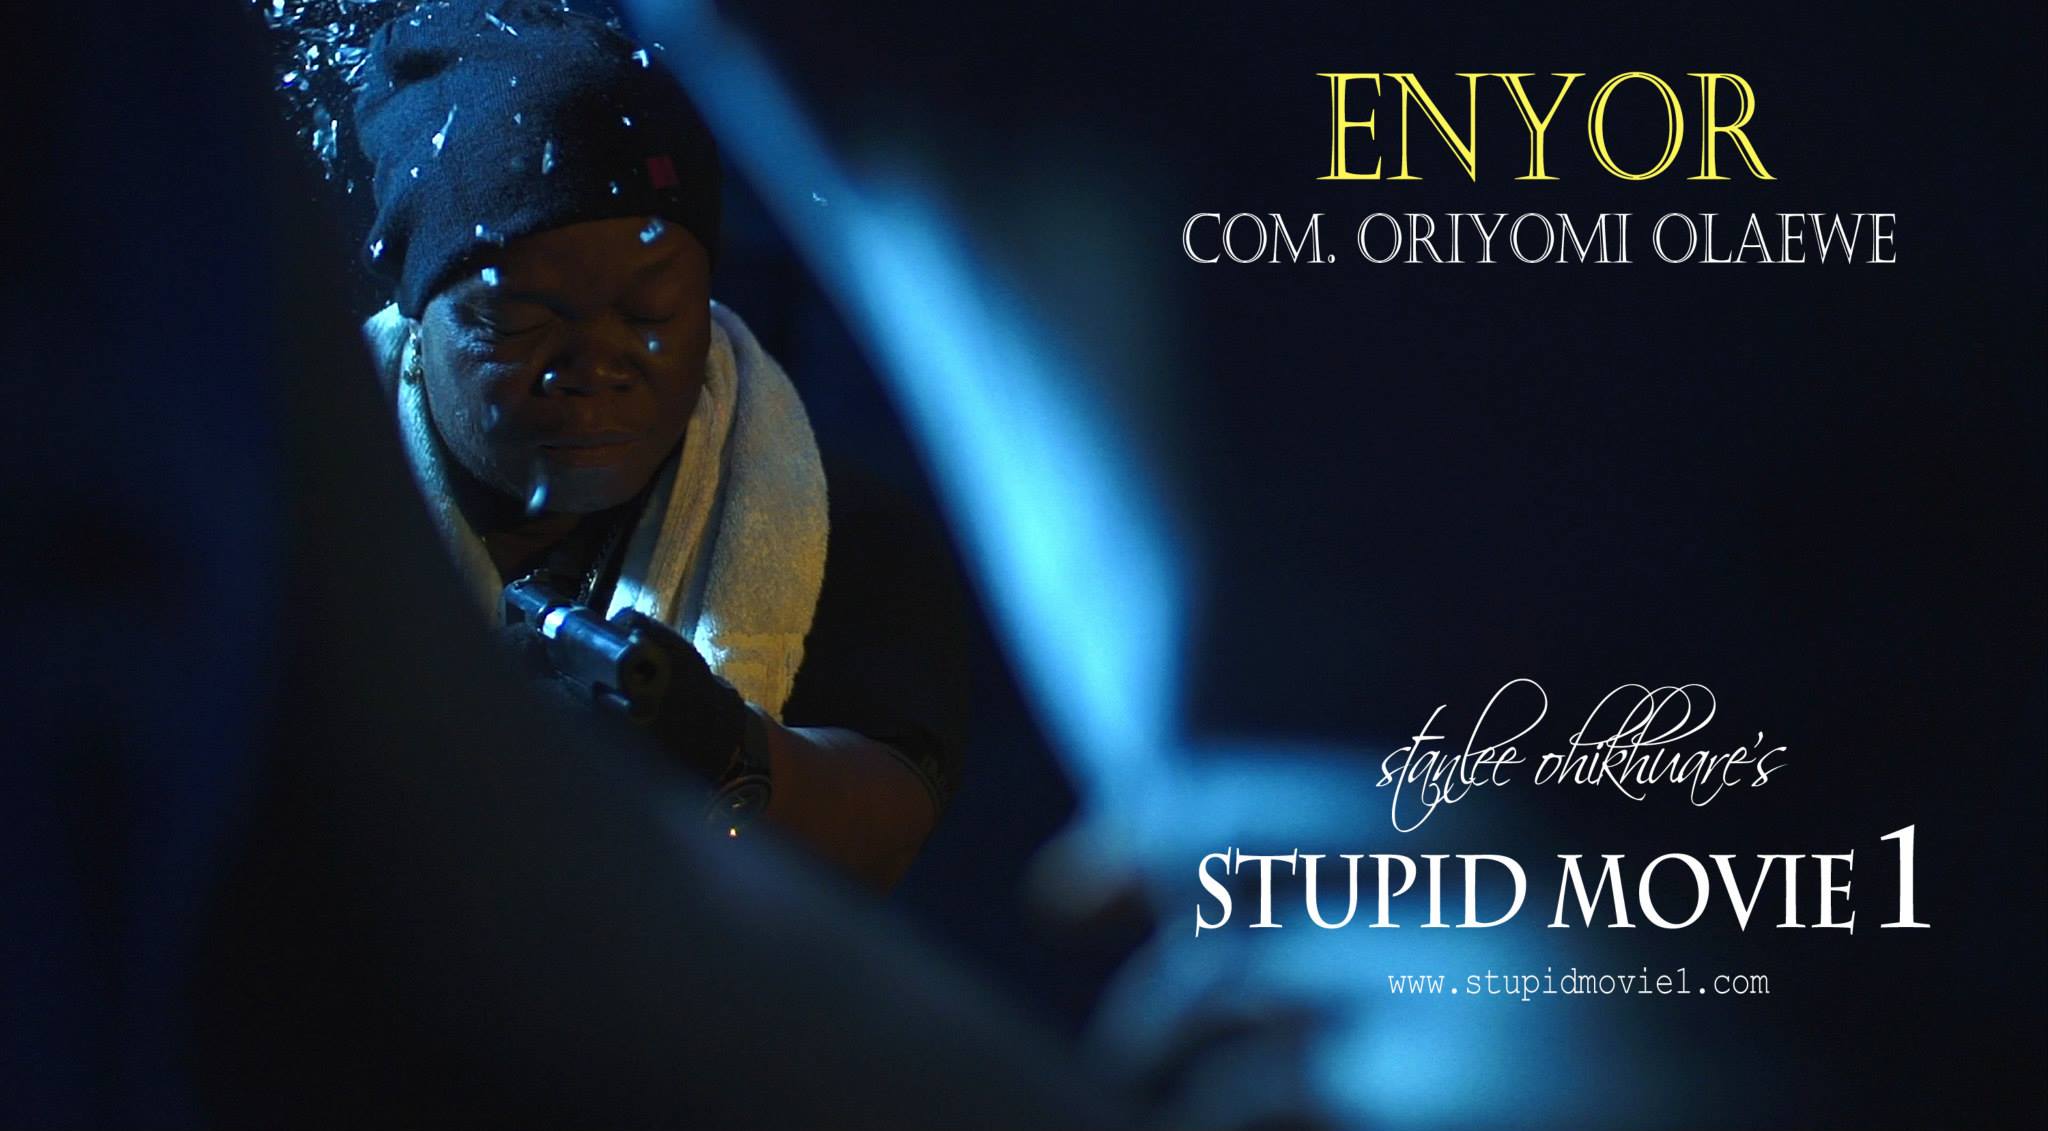 CHARACTER POSTER (ENYOR) for Stanlee Ohikhuare's STUPID MOVIE 1